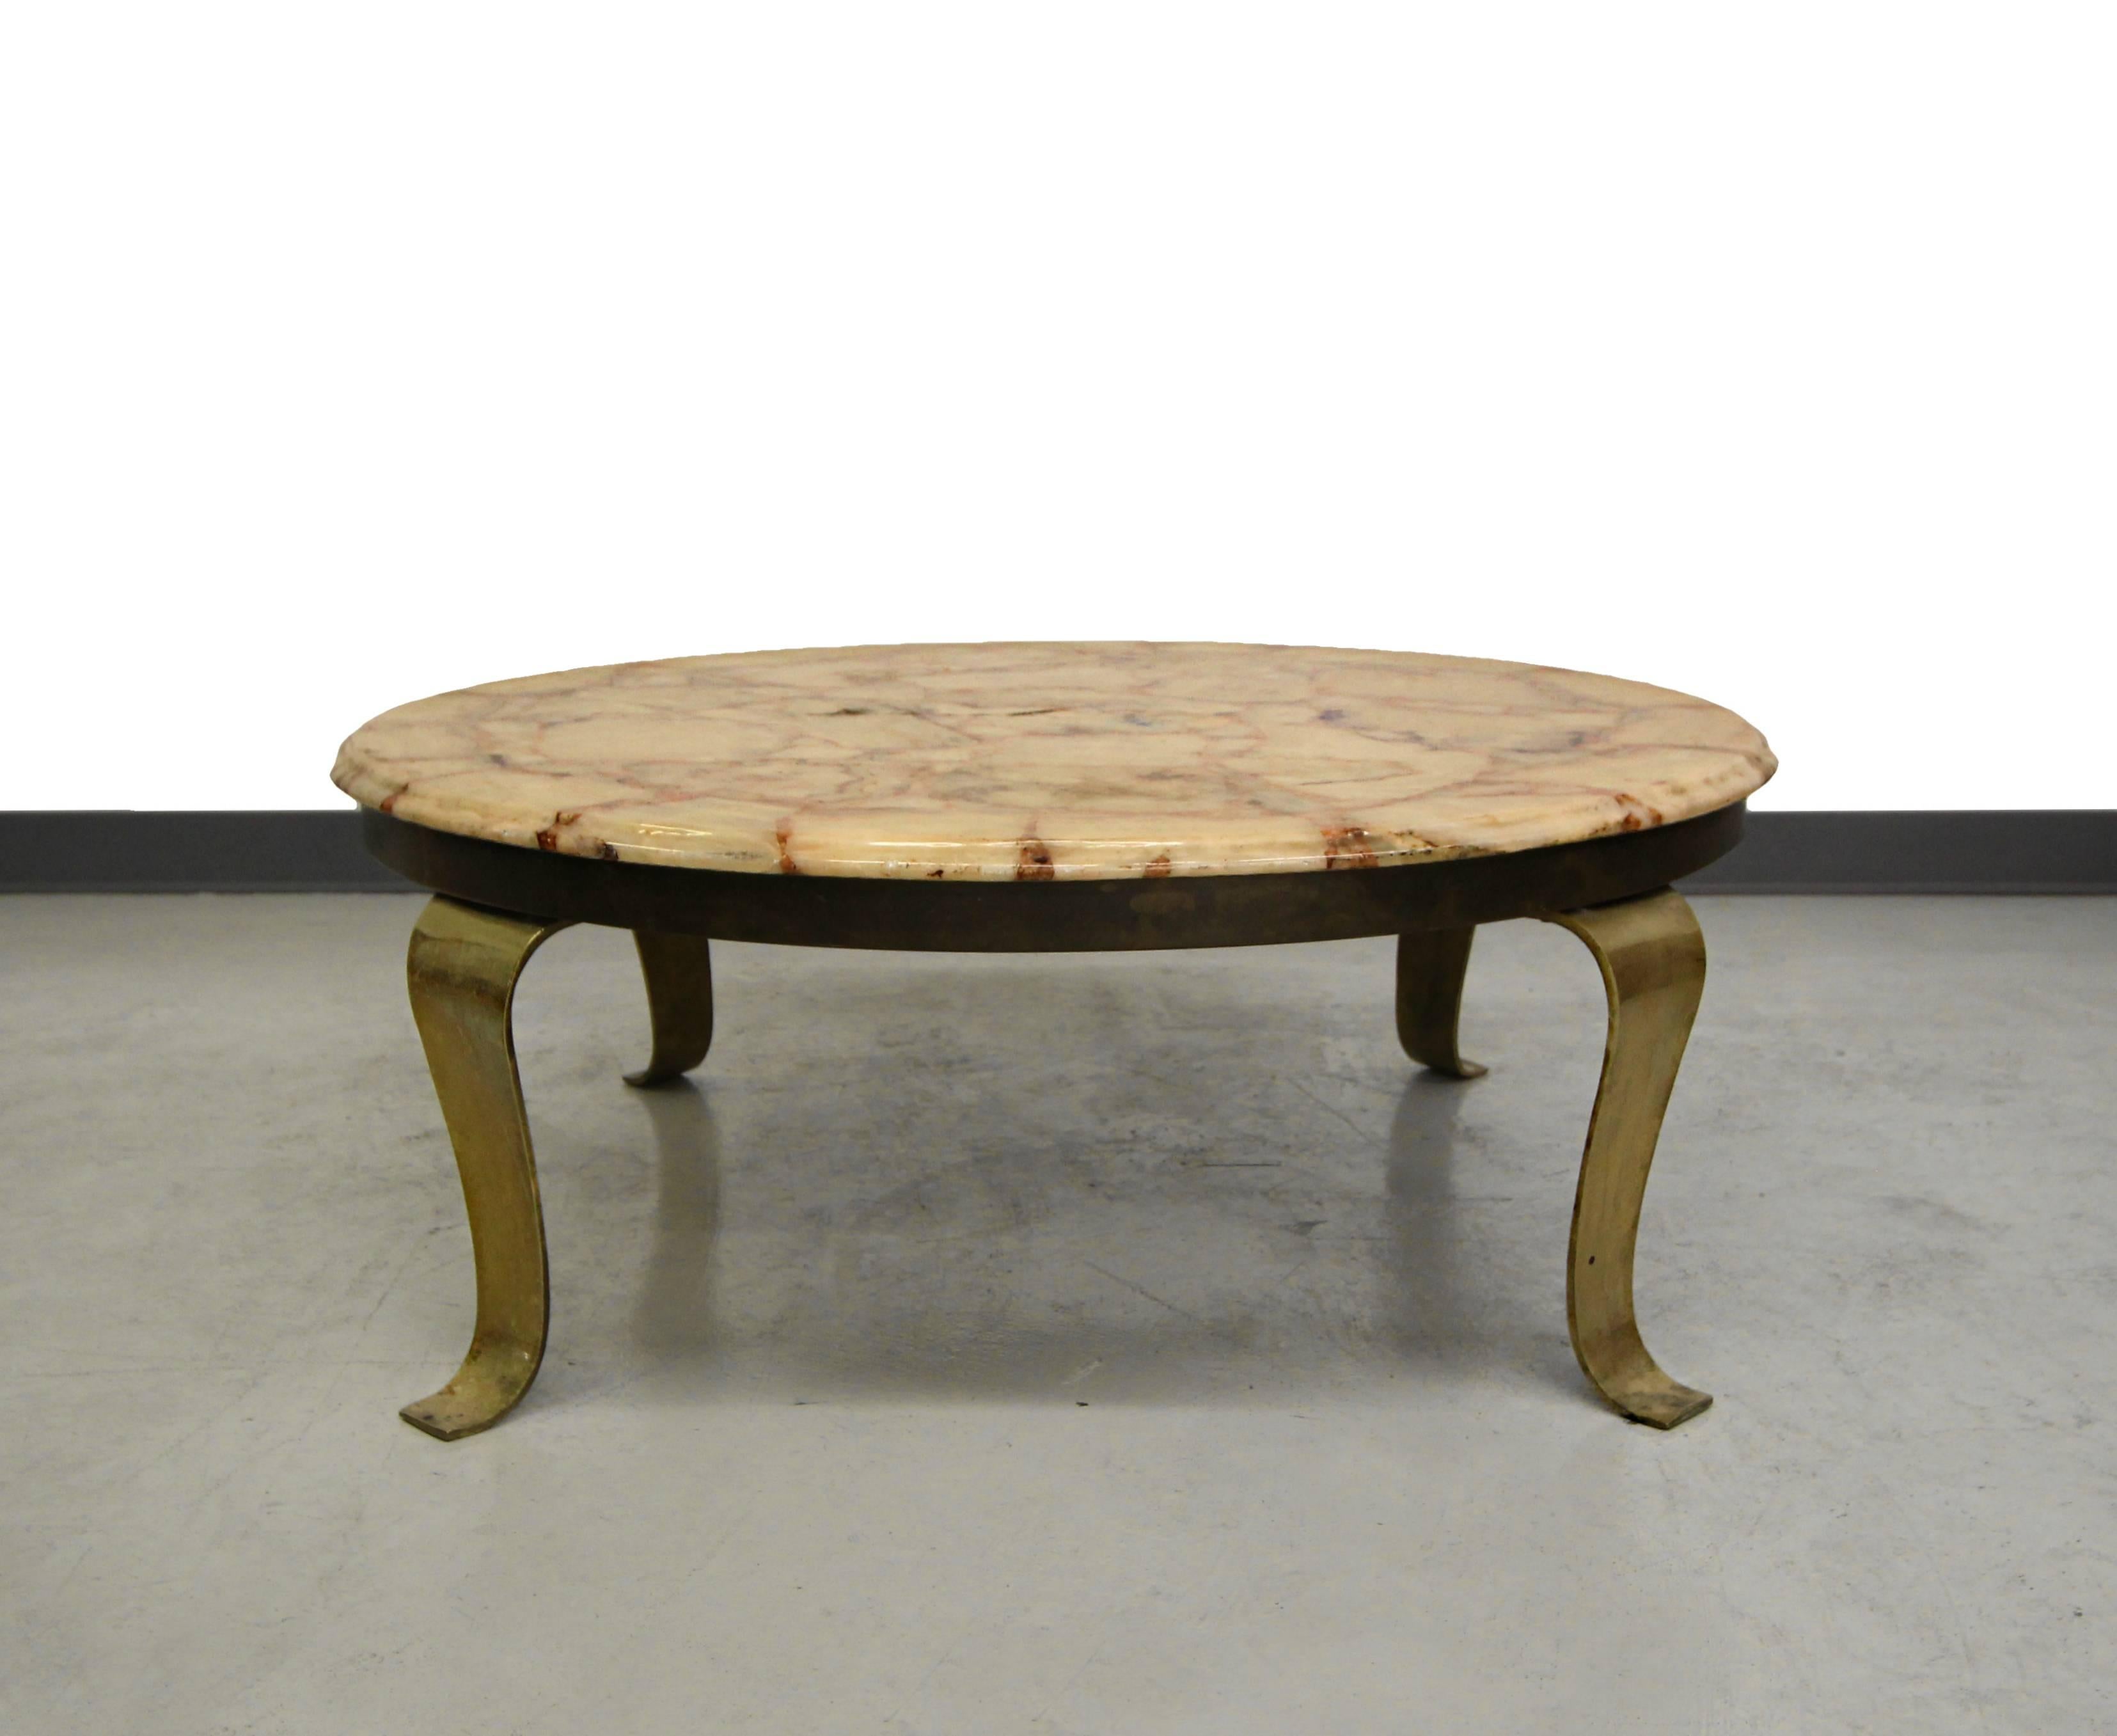 Gorgeous onyx coffee table designed by Roberto and Mito Block for Muller Onyx. Table has a gorgeous marbled onyx top mounted on beautiful scrolling solid brass legs and solid brass edge banding. Brass has been left as is showing beautiful patina but